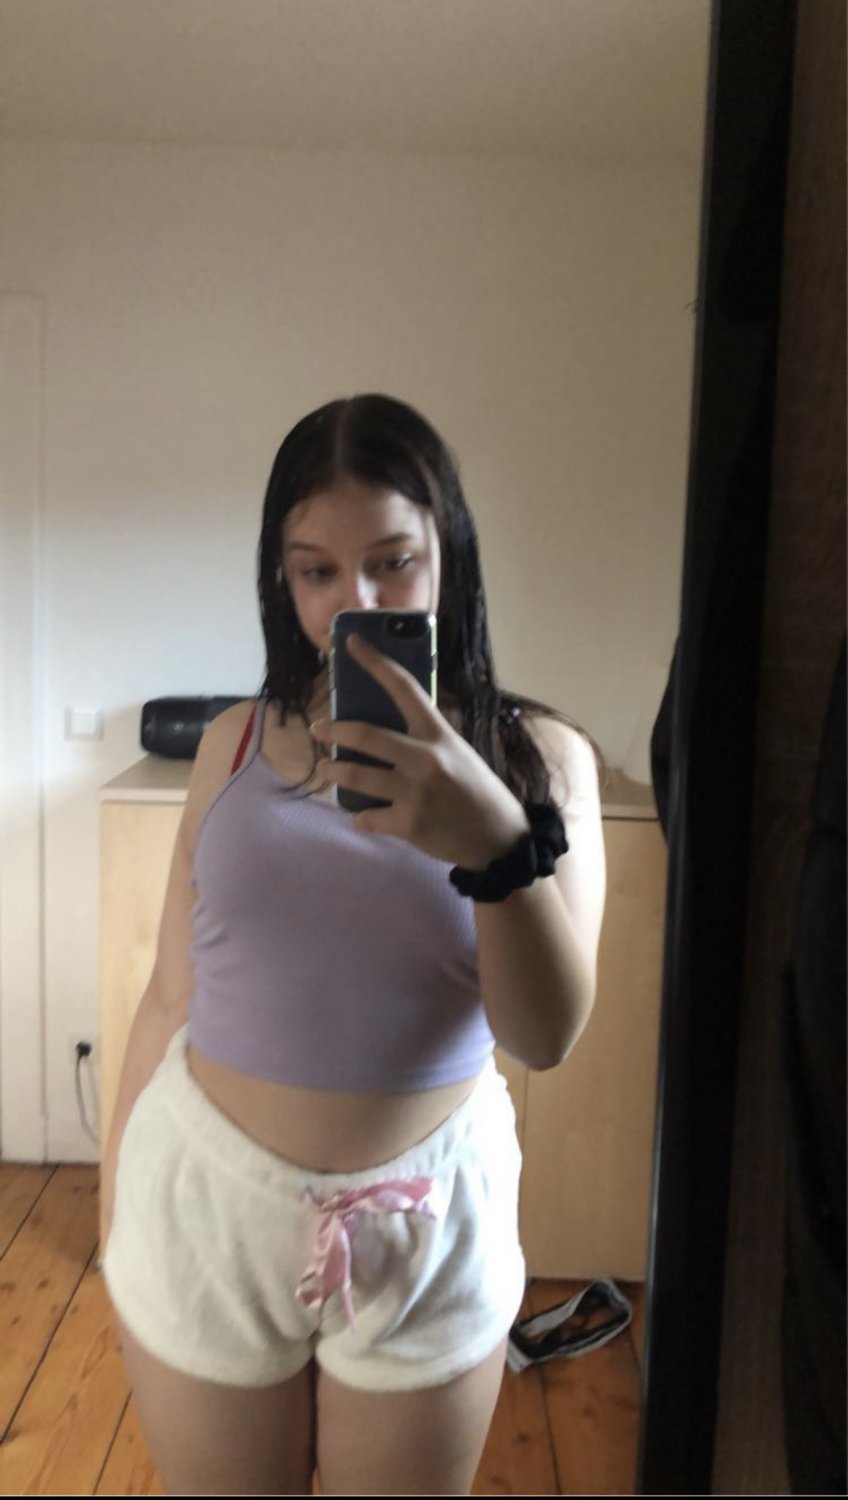 My Chubby 18 years old girlfriend ) Trib her if you want picture